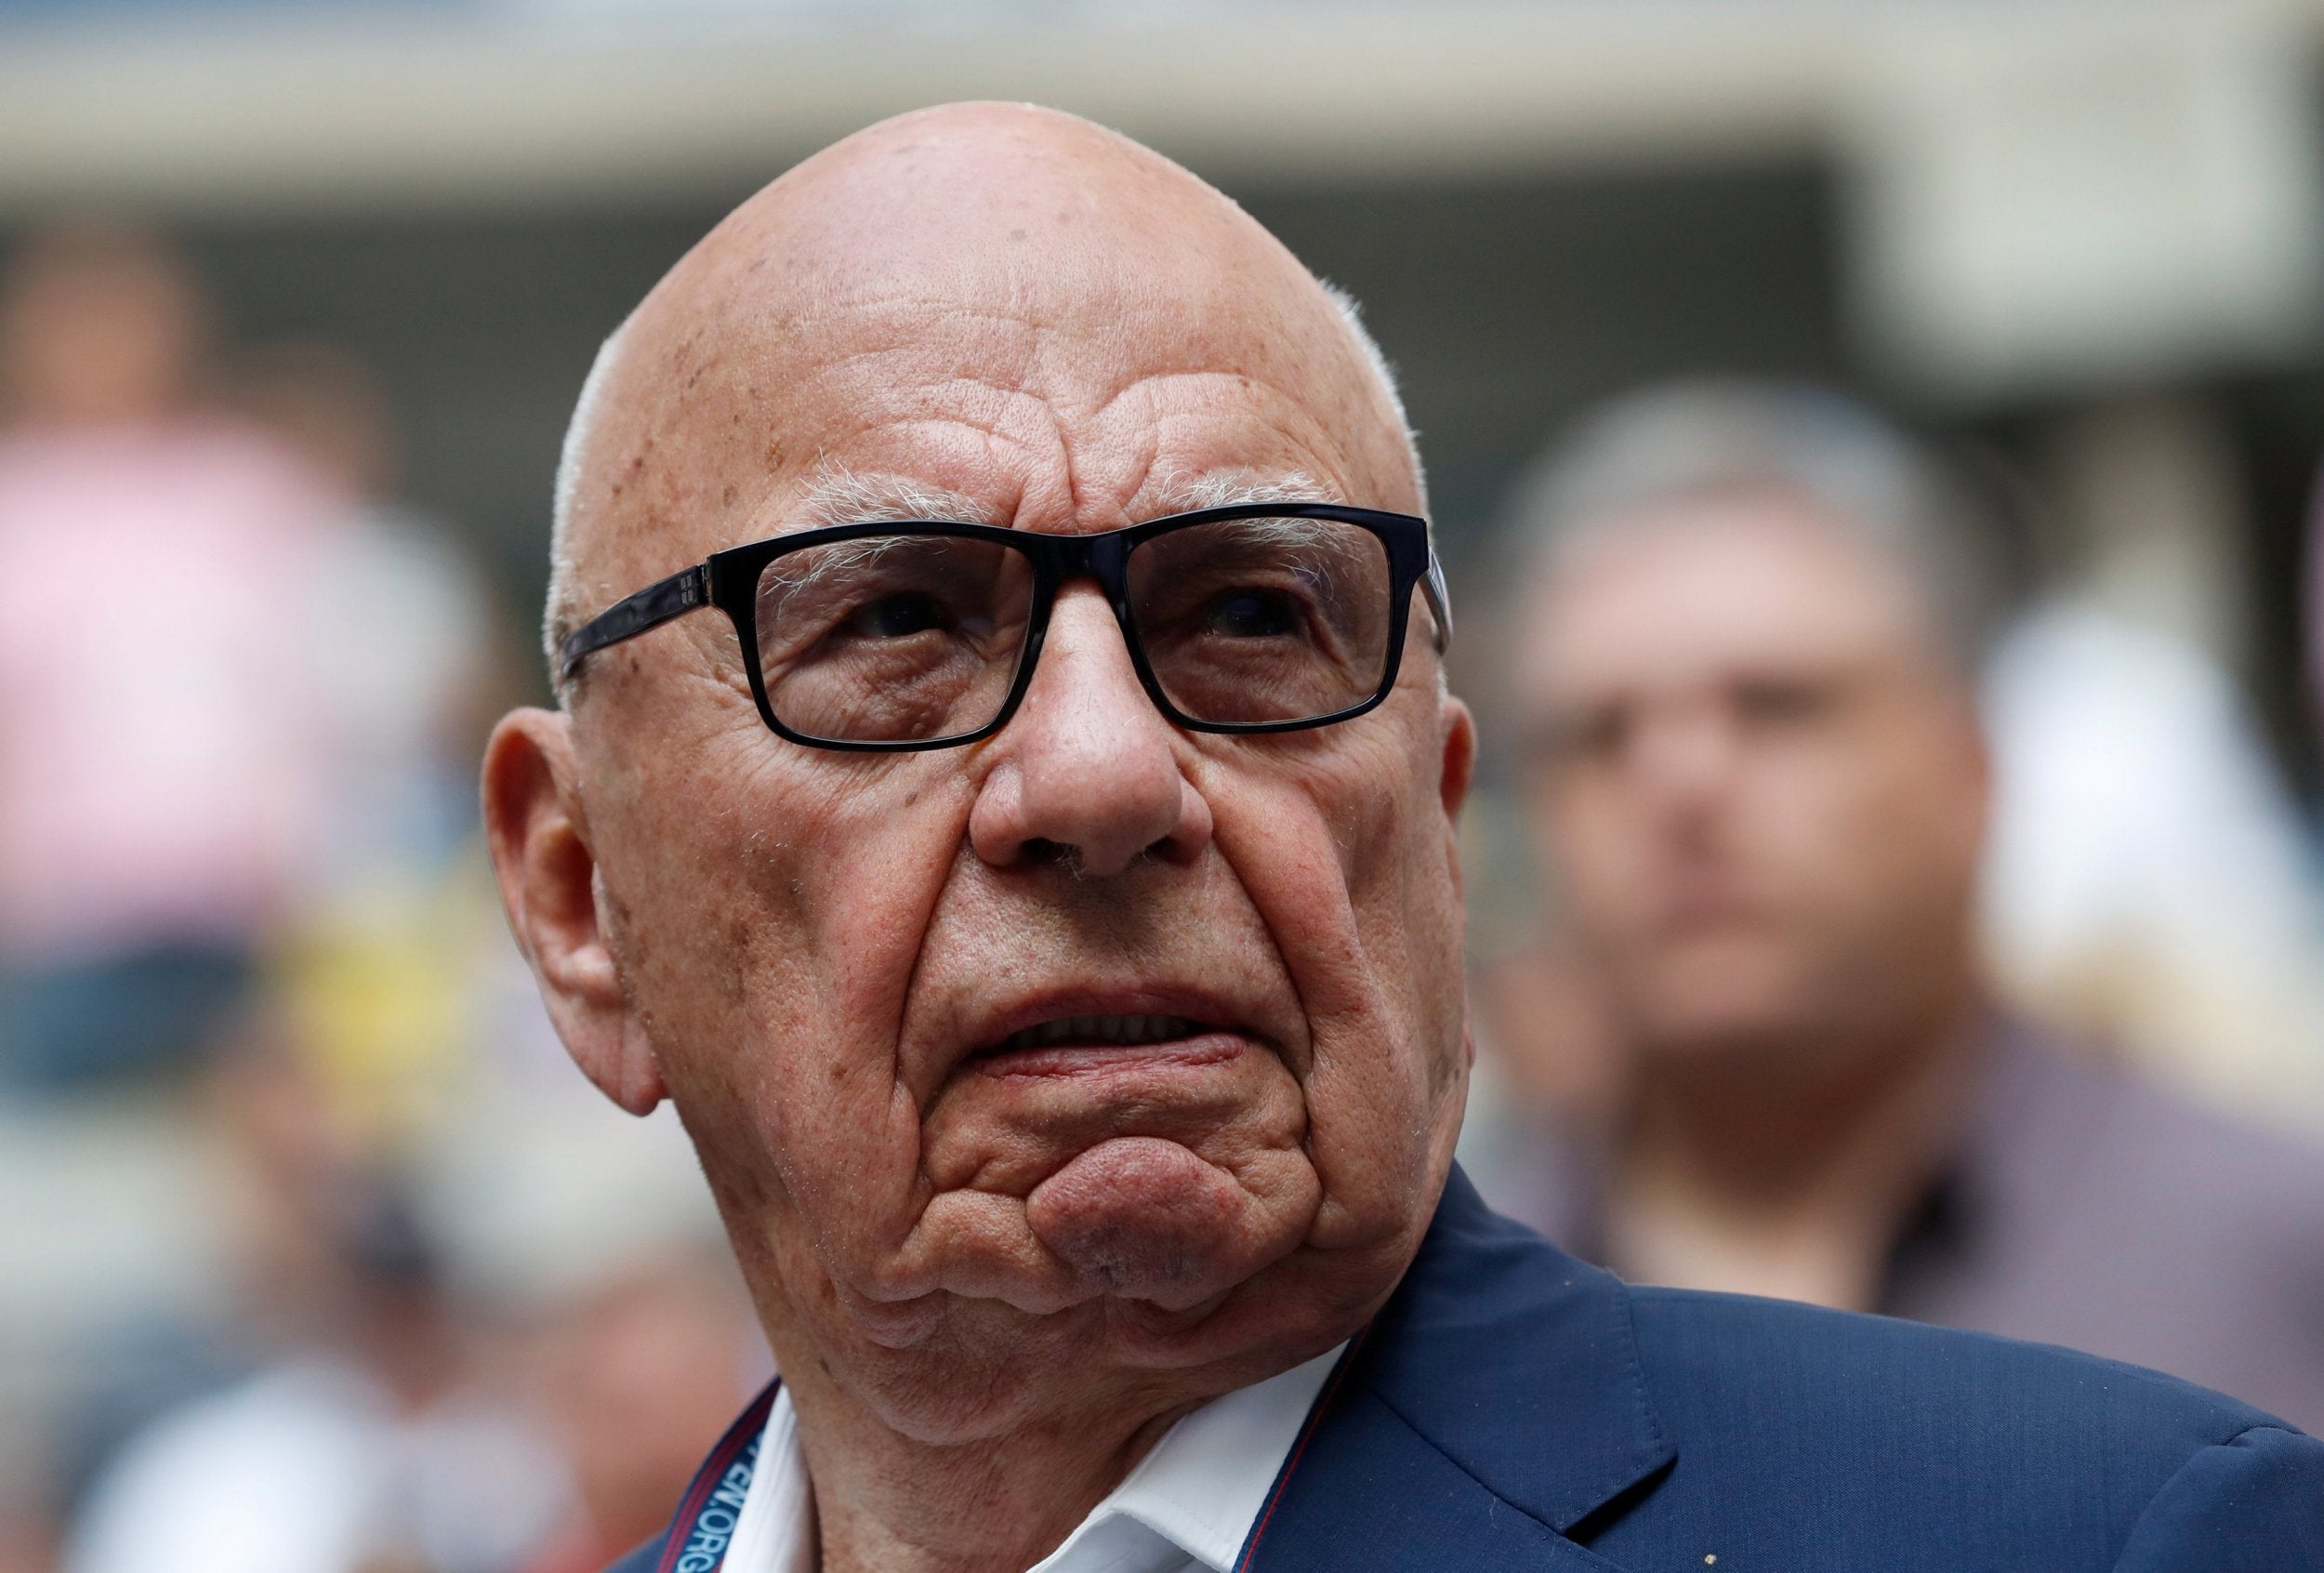 Murdoch now has the opportunity to return to his first love - newspapers